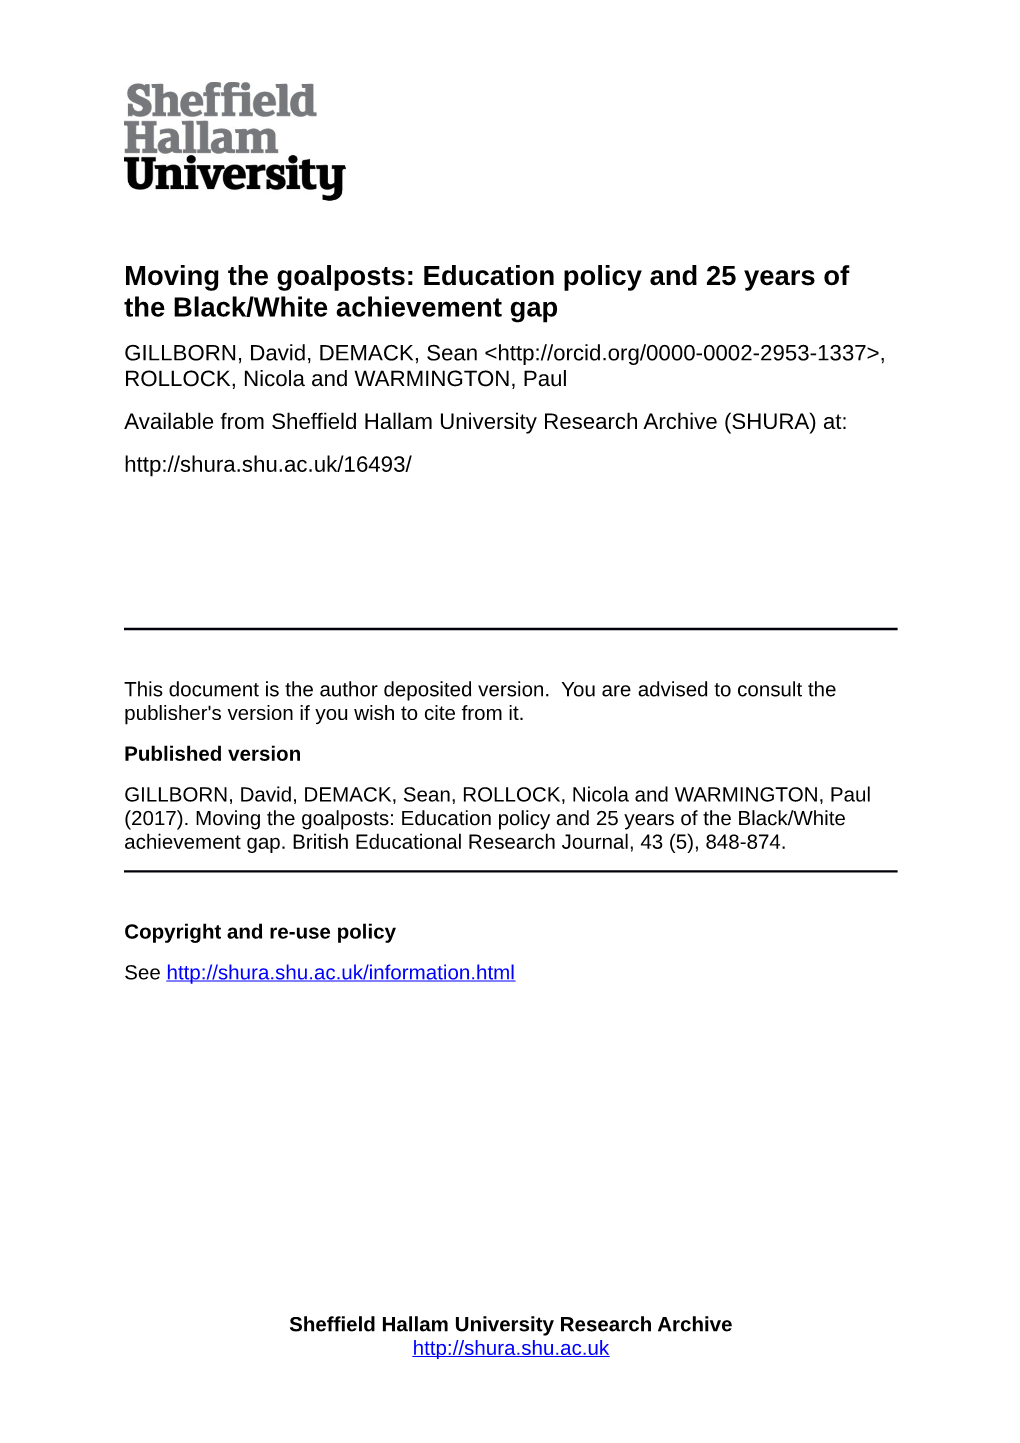 Education Policy and 25 Years of the Black/White Achievement